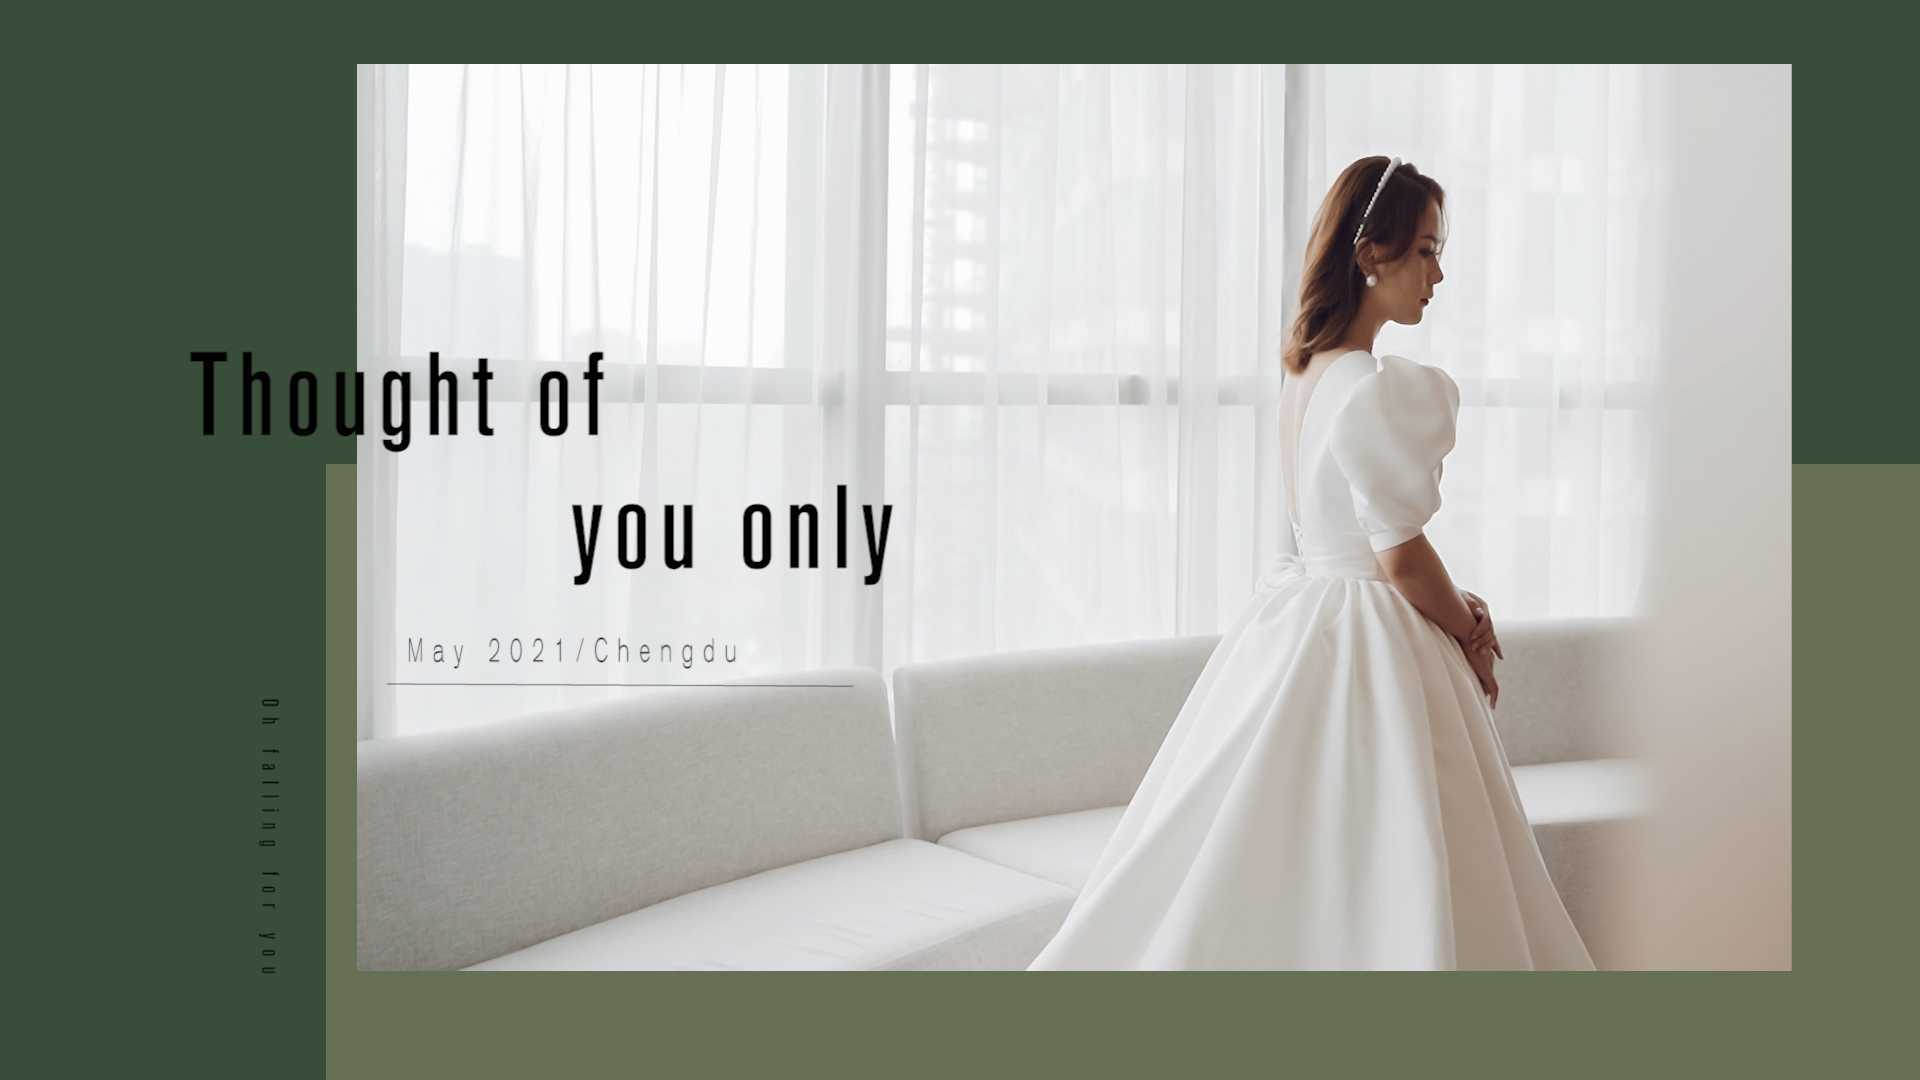 Hefeng films | 婚礼电影《Thought of you only》